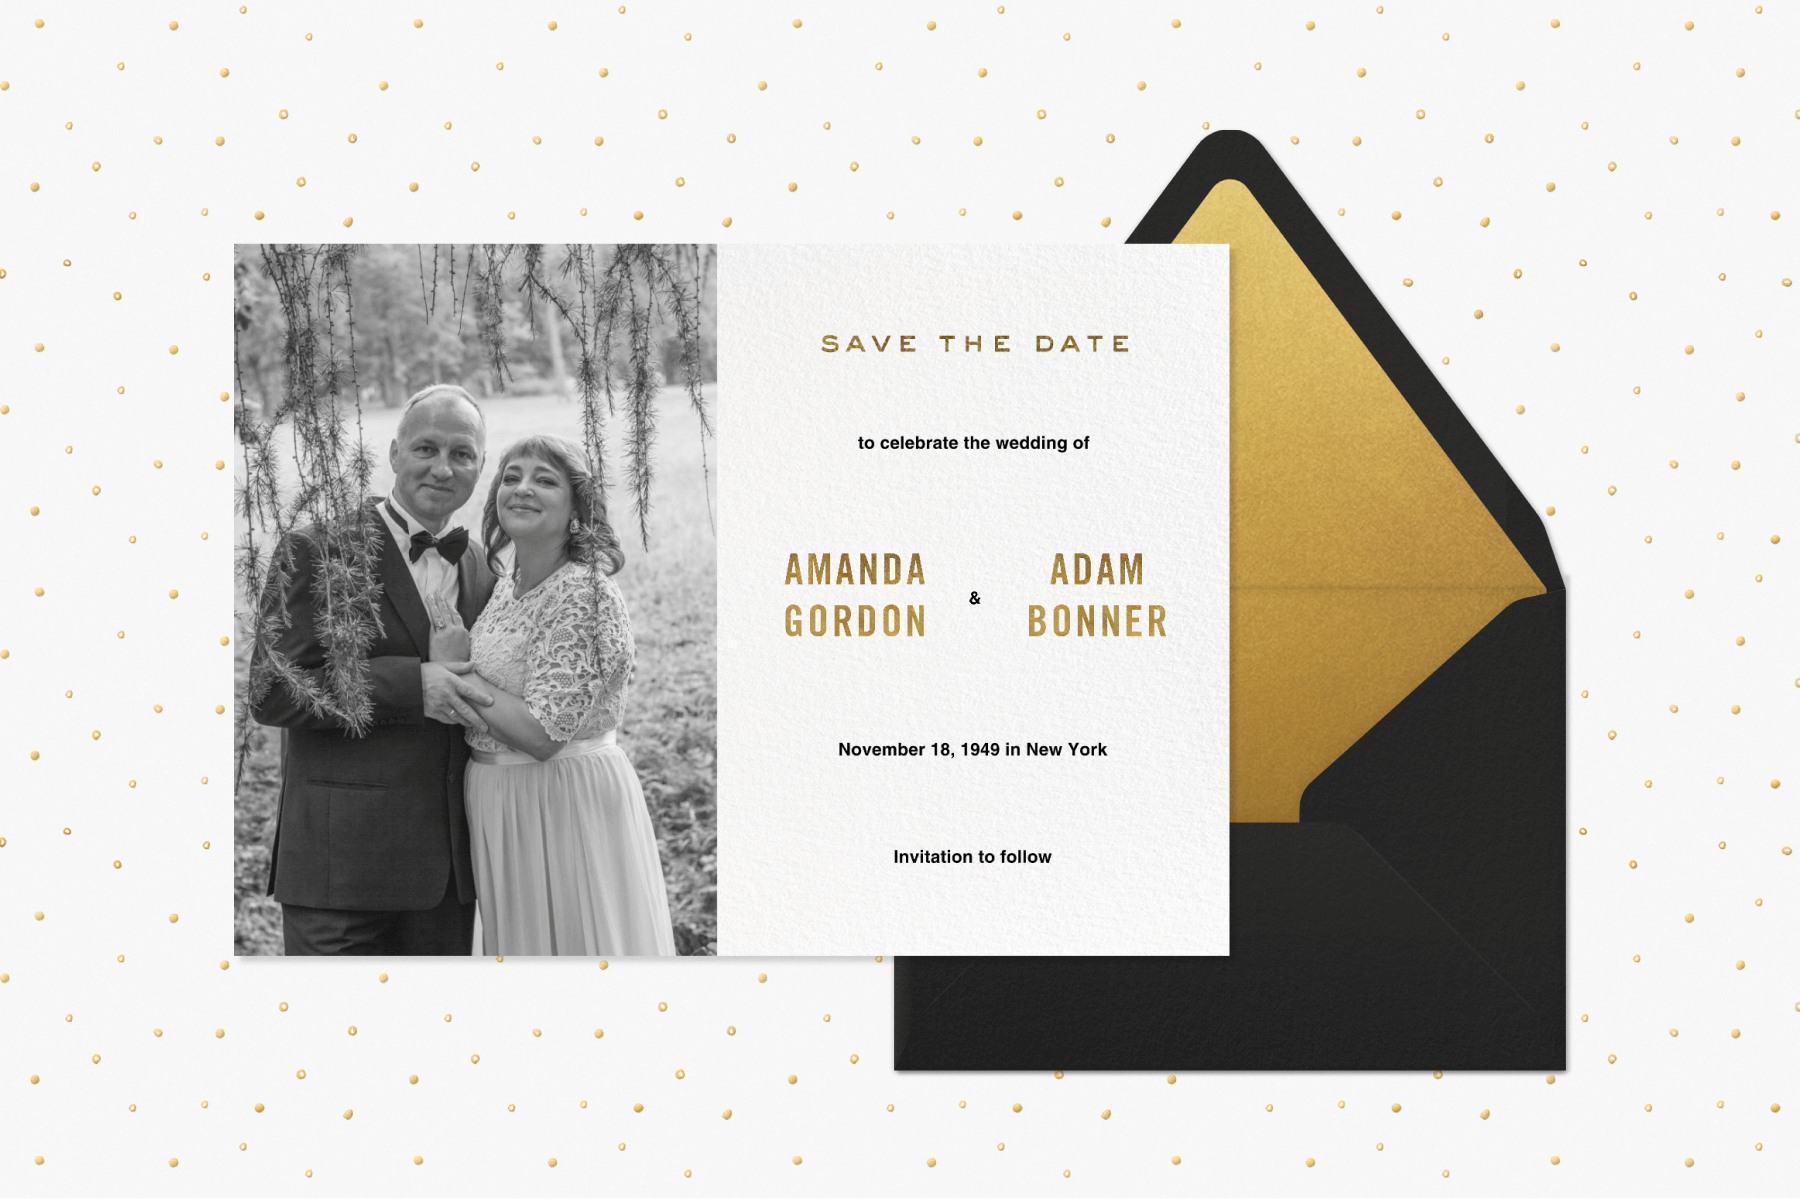 Save the date invitation featuring a black and white photo of a couple with gold writing, paired with a black envelope with a gold liner.